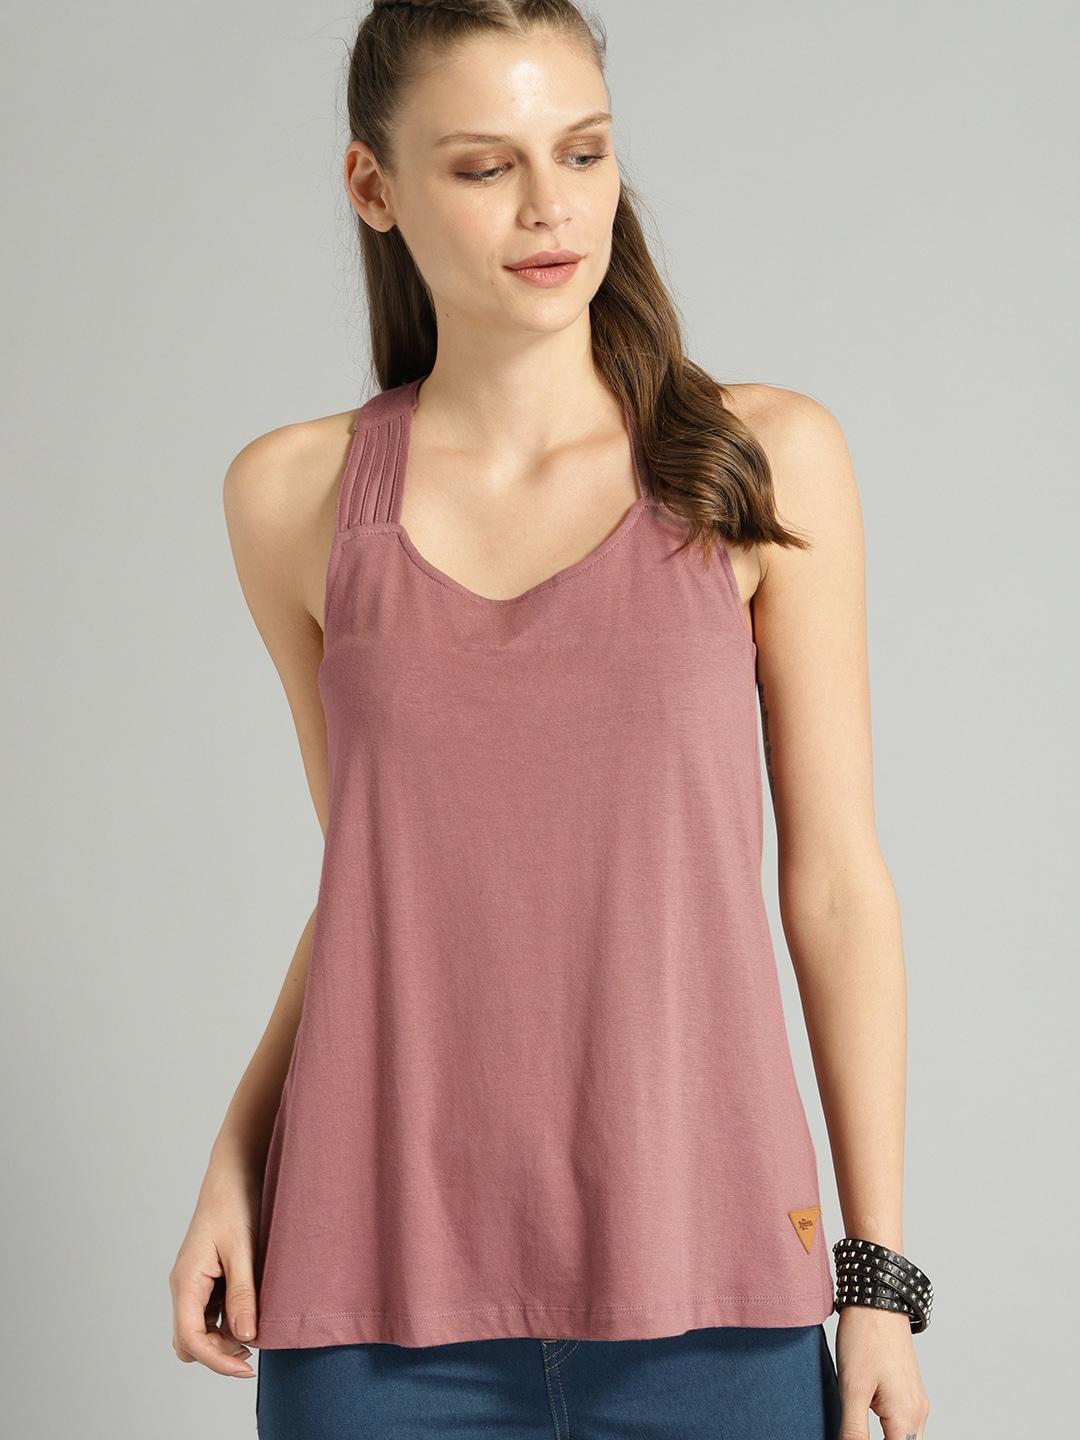 roadster-women-peach-coloured-solid-tank-top